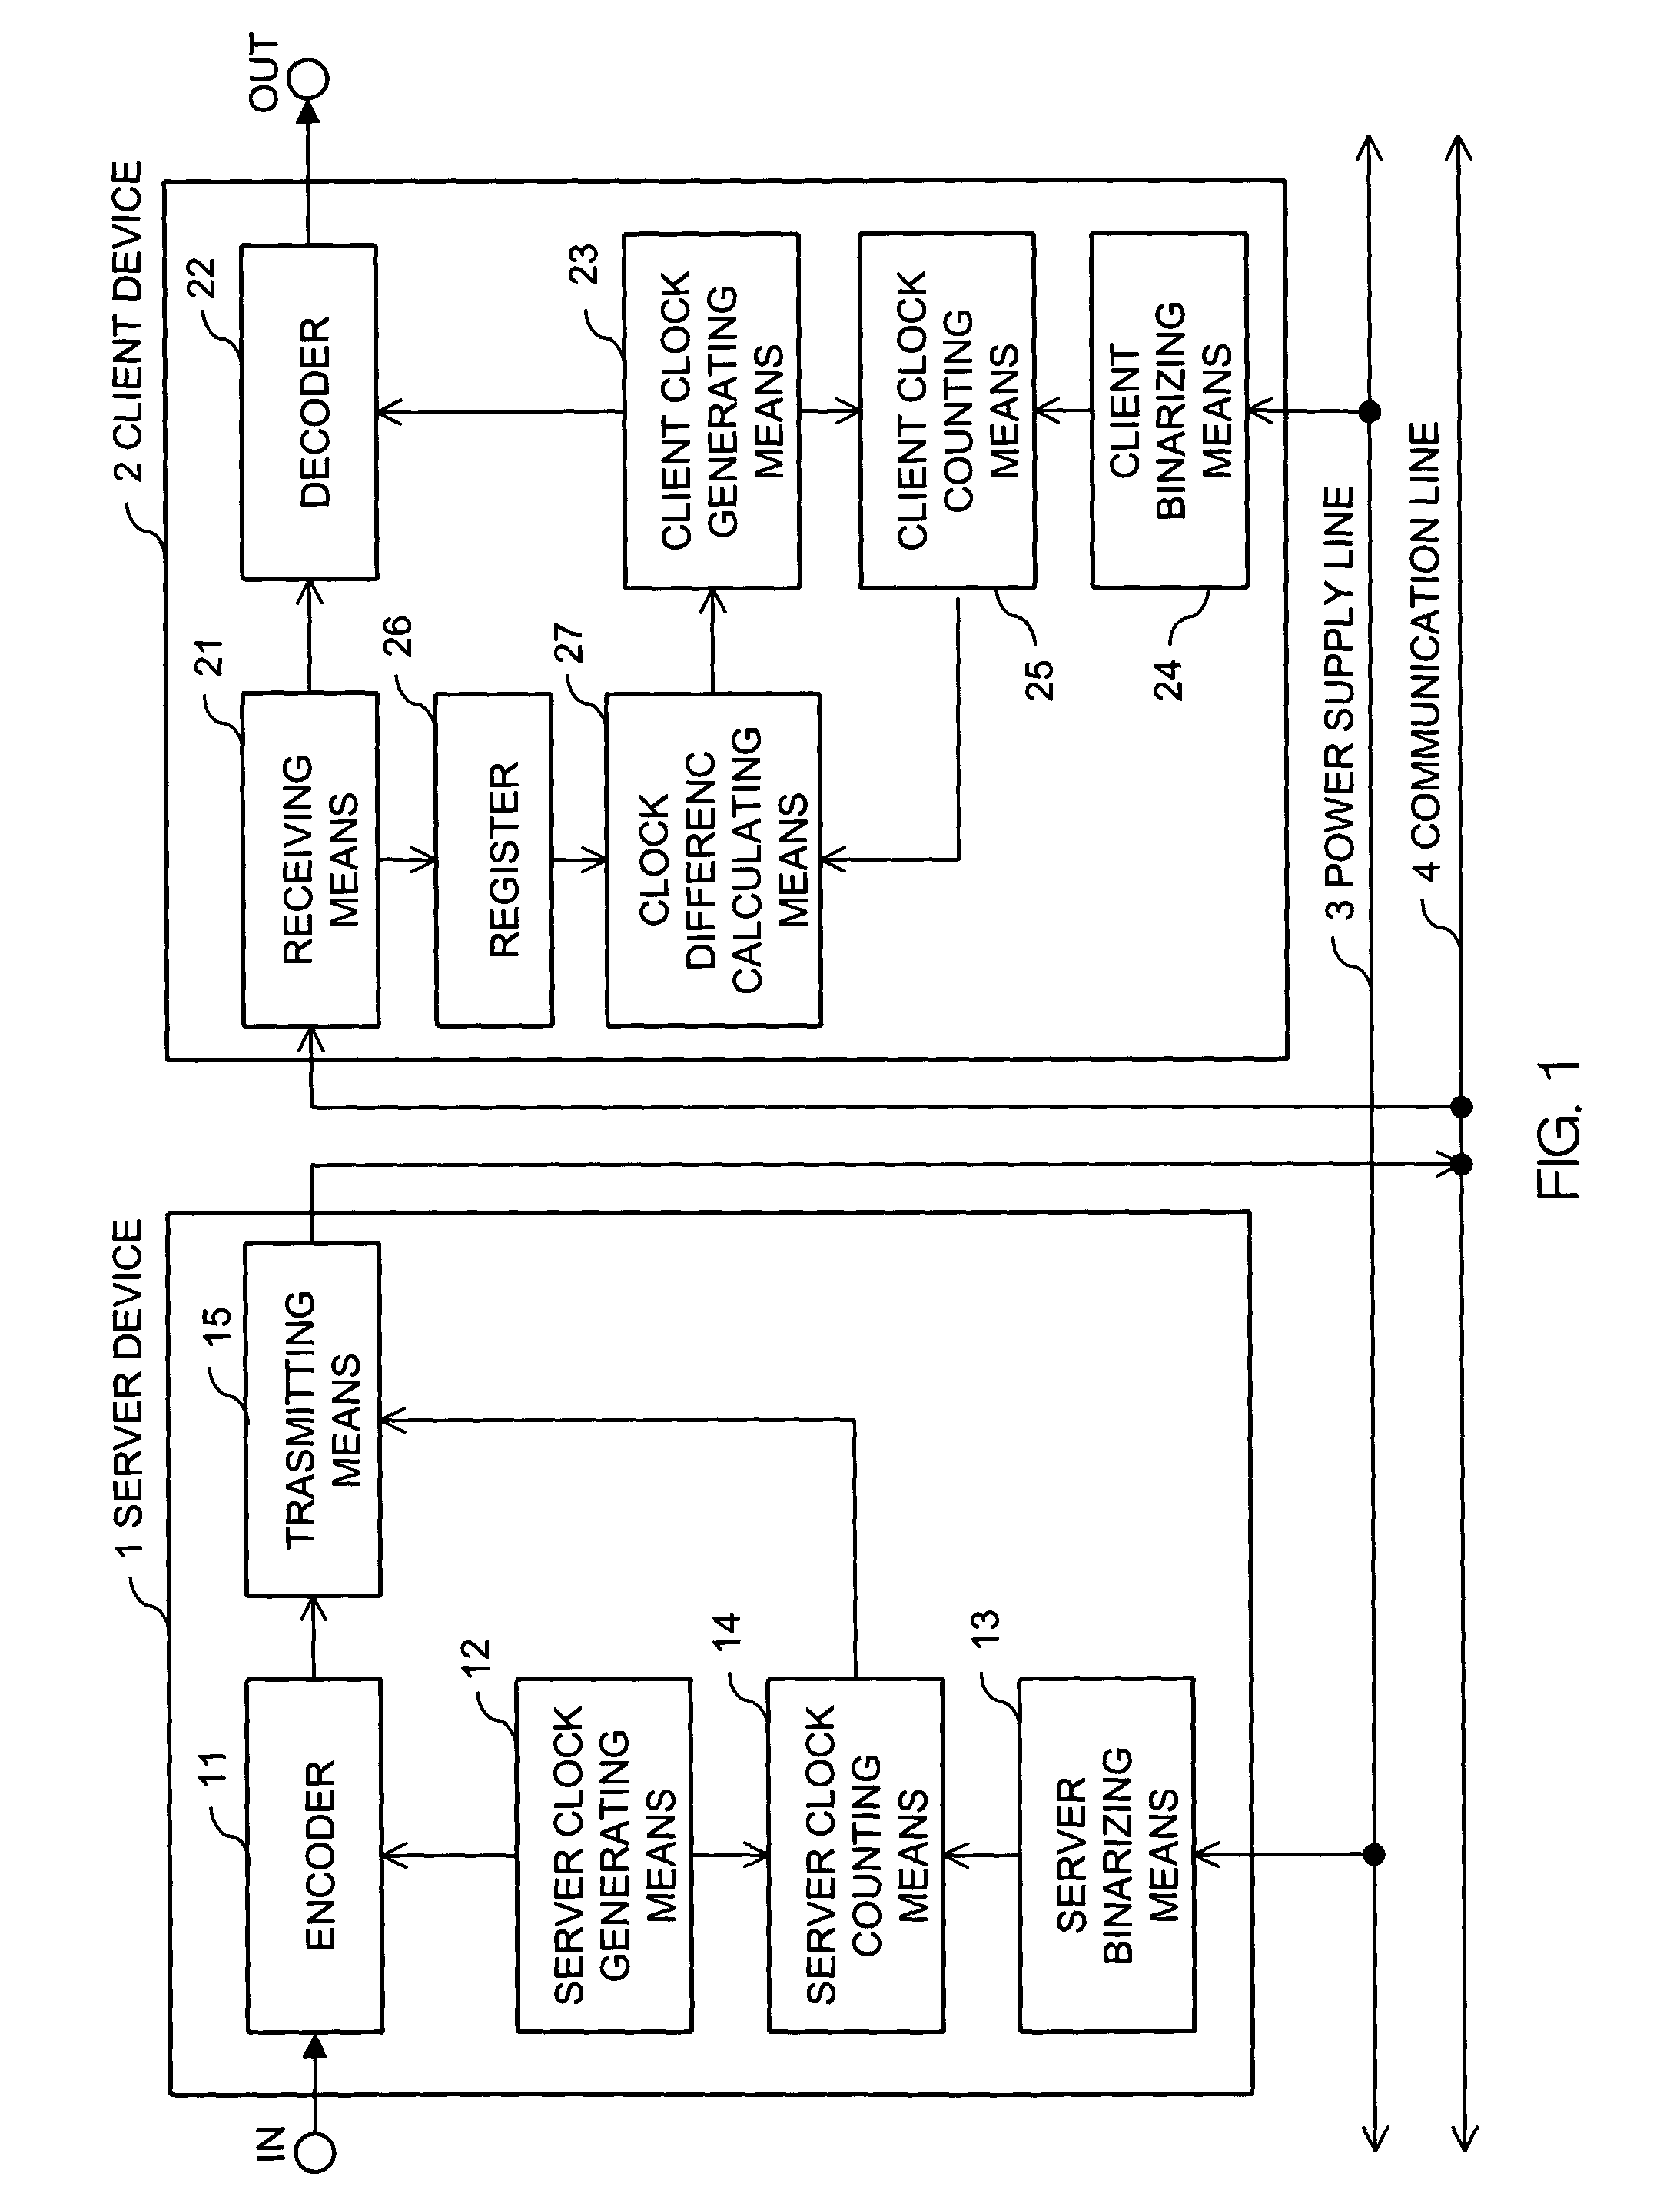 Synchronizing clock signals of server and client devices in a network system based on power source synchronous pulse signal